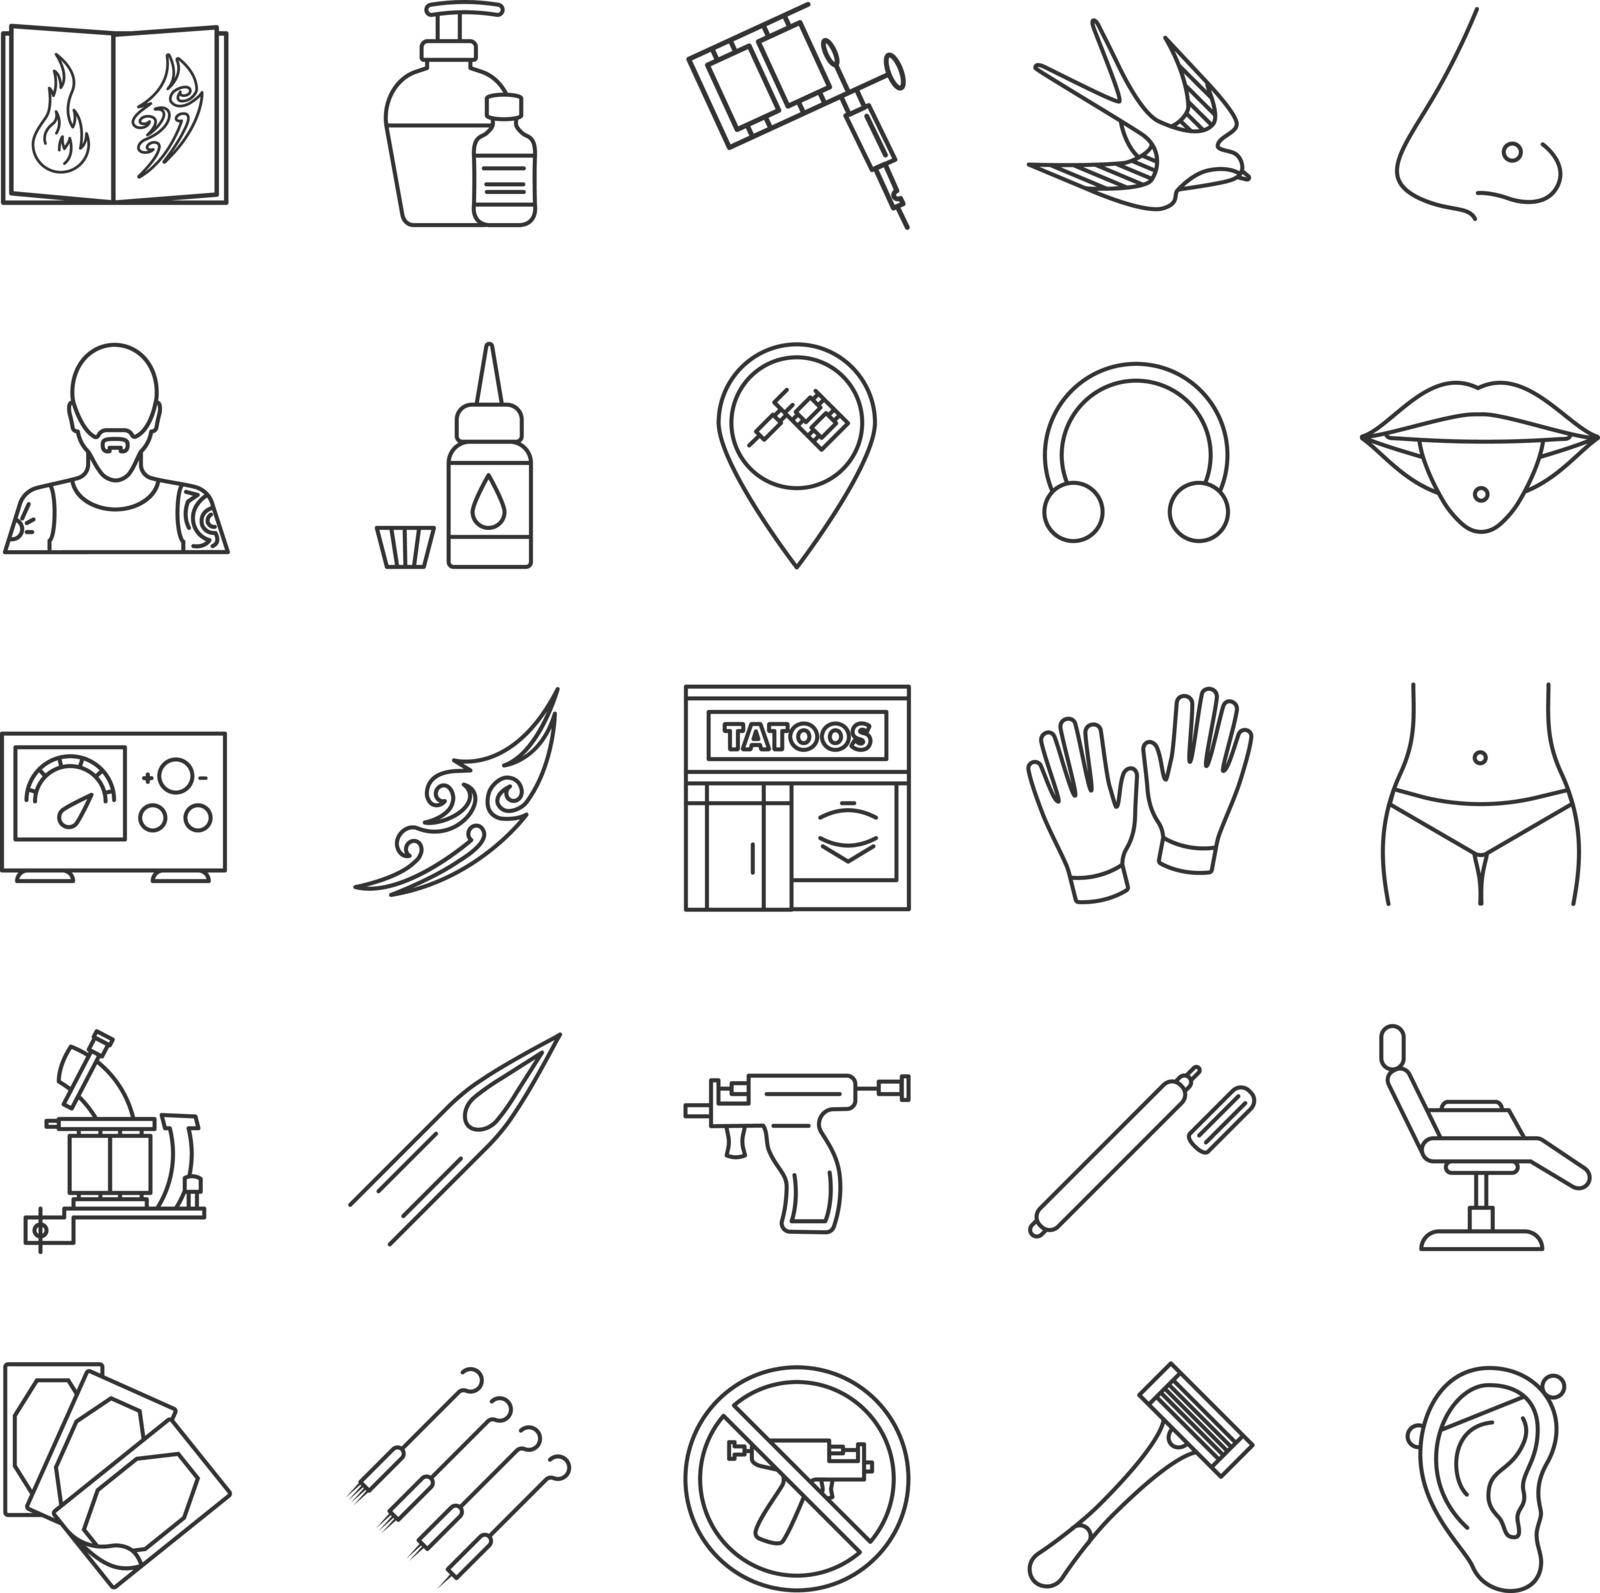 Tattoo studio linear icons set. Piercing service. Tattoo sketches, instruments and equipment. Thin line contour symbols. Isolated vector outline illustrations